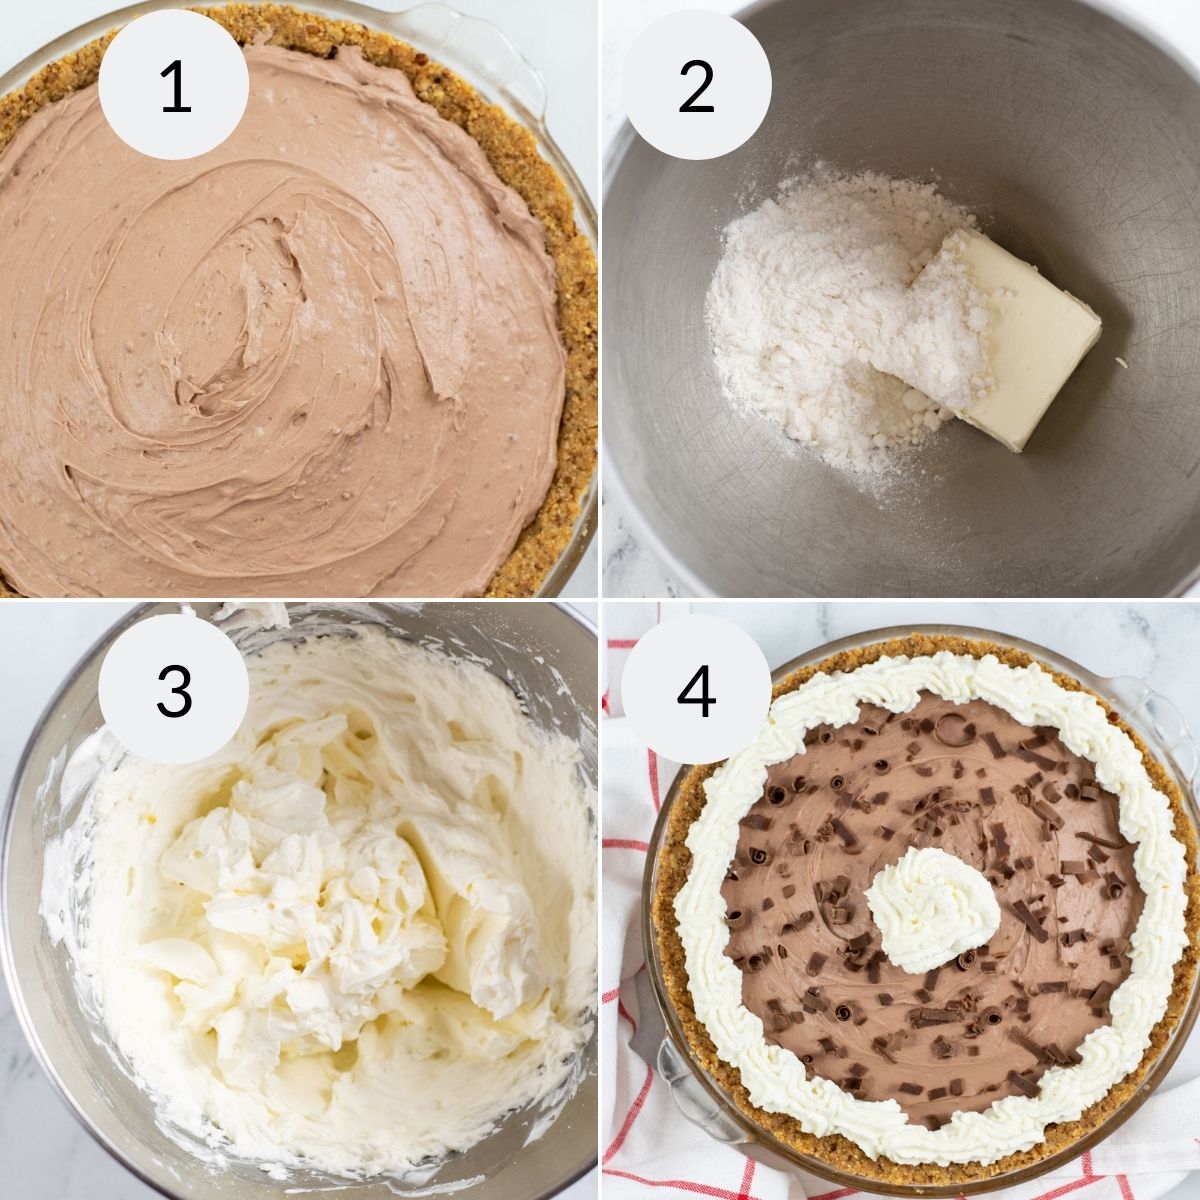 Assembling the layers and decorating the pie.